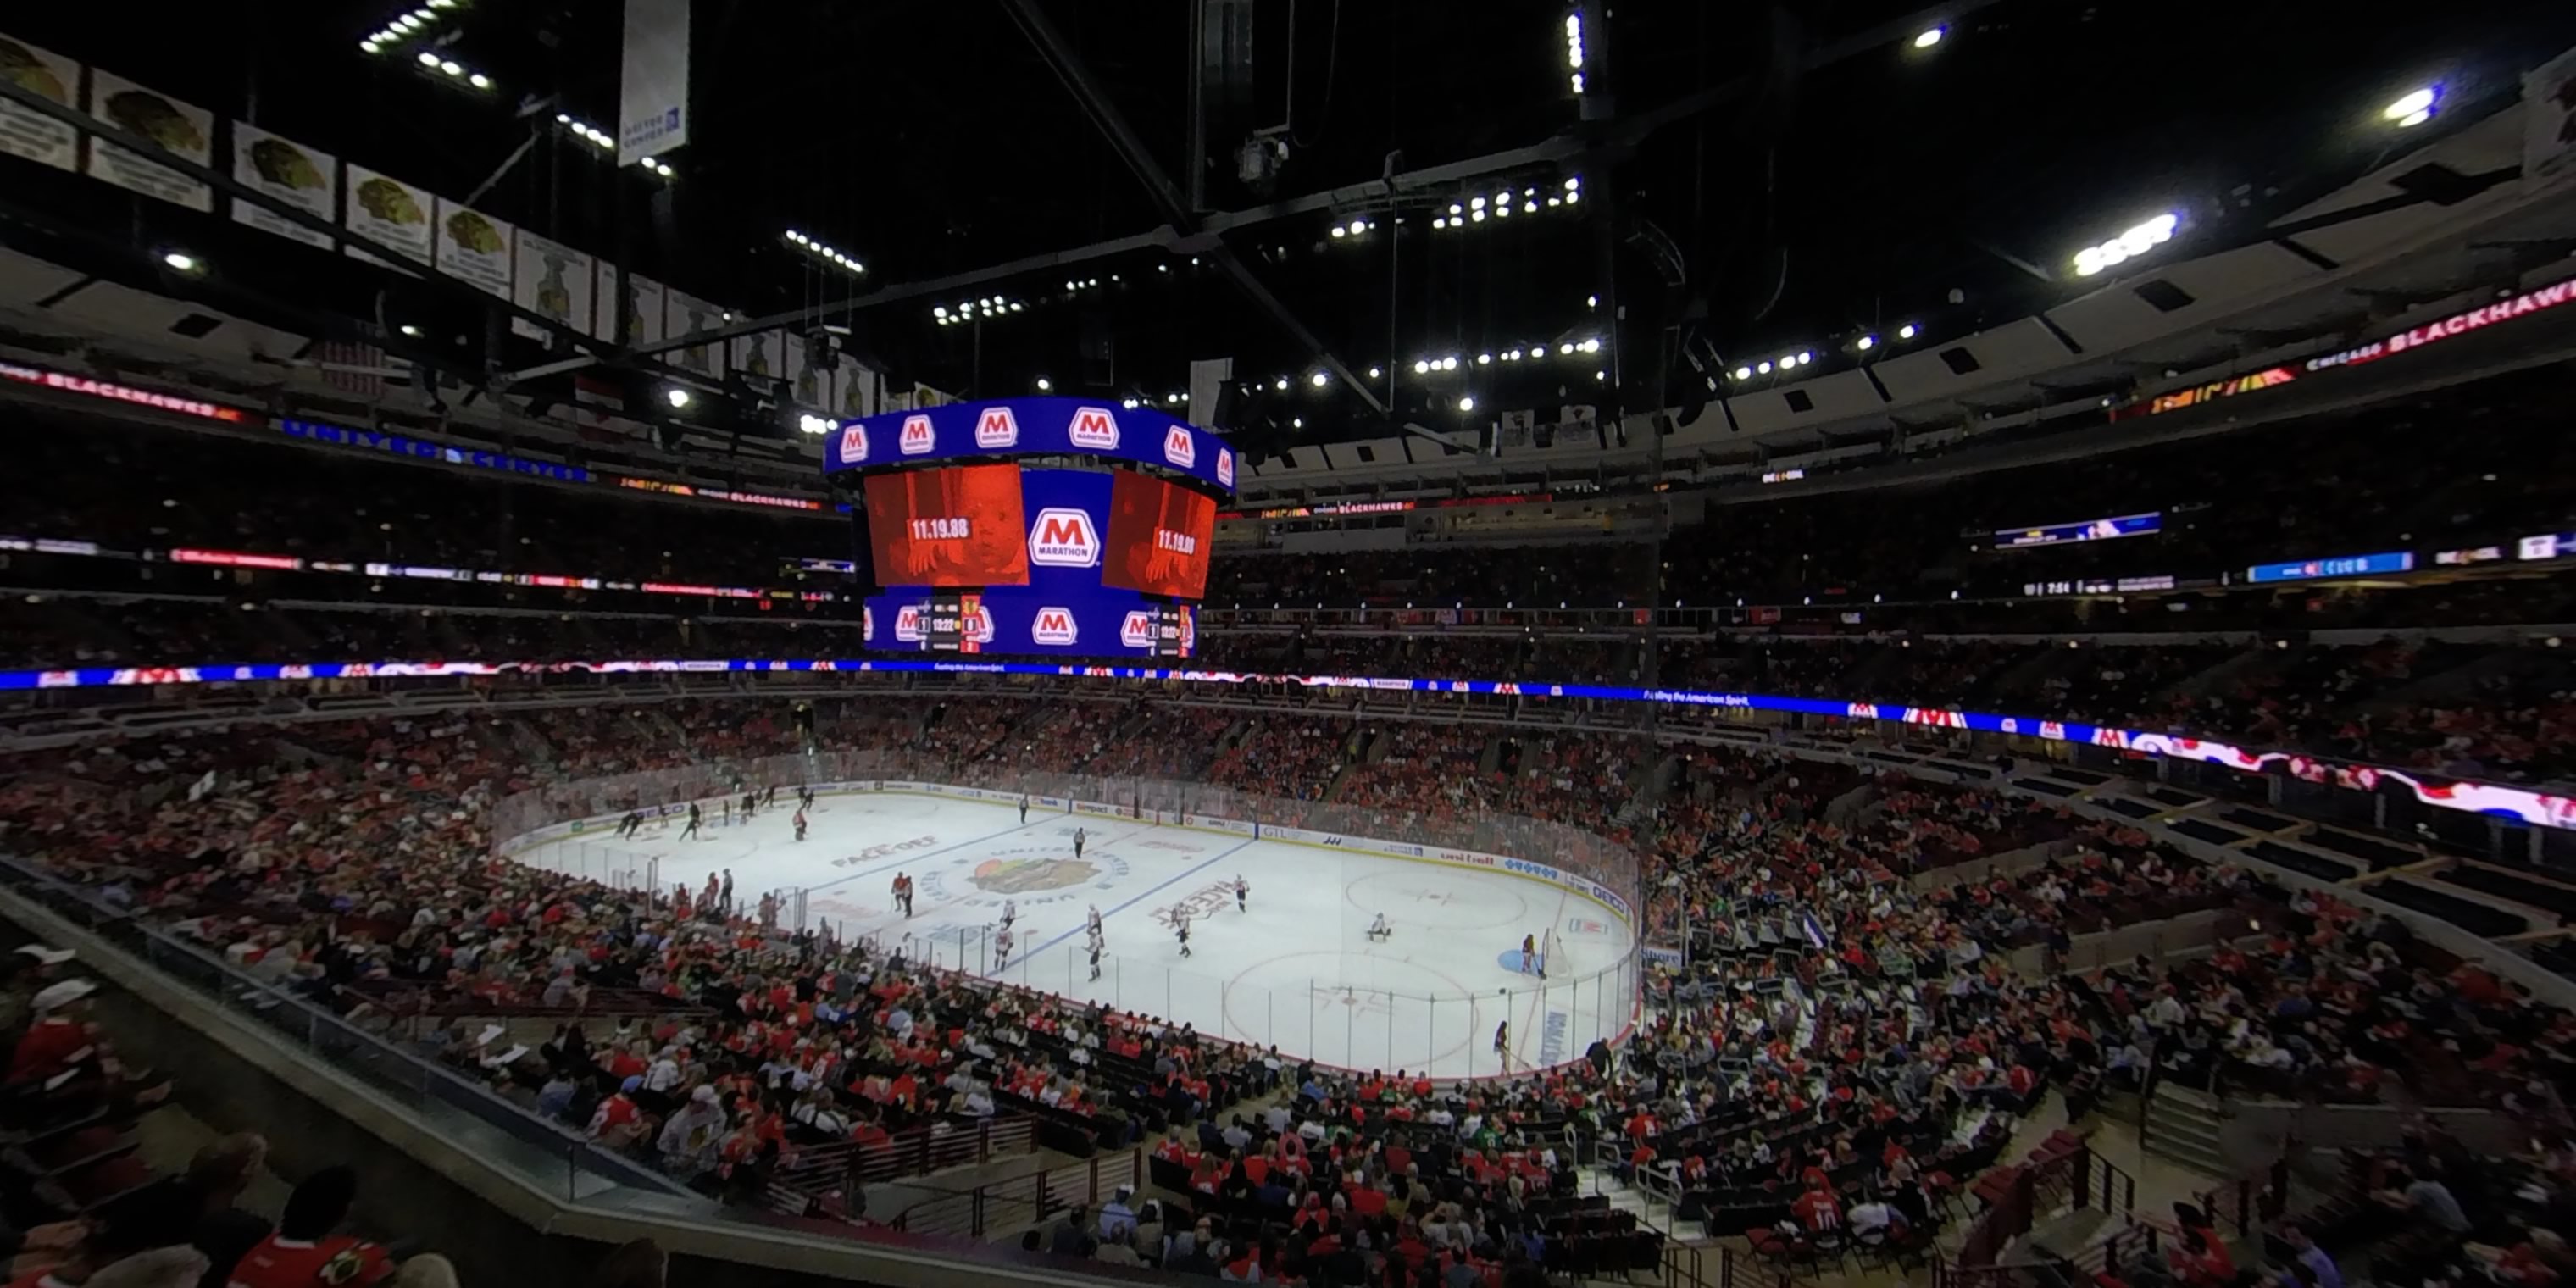 section 231 panoramic seat view  for hockey - united center